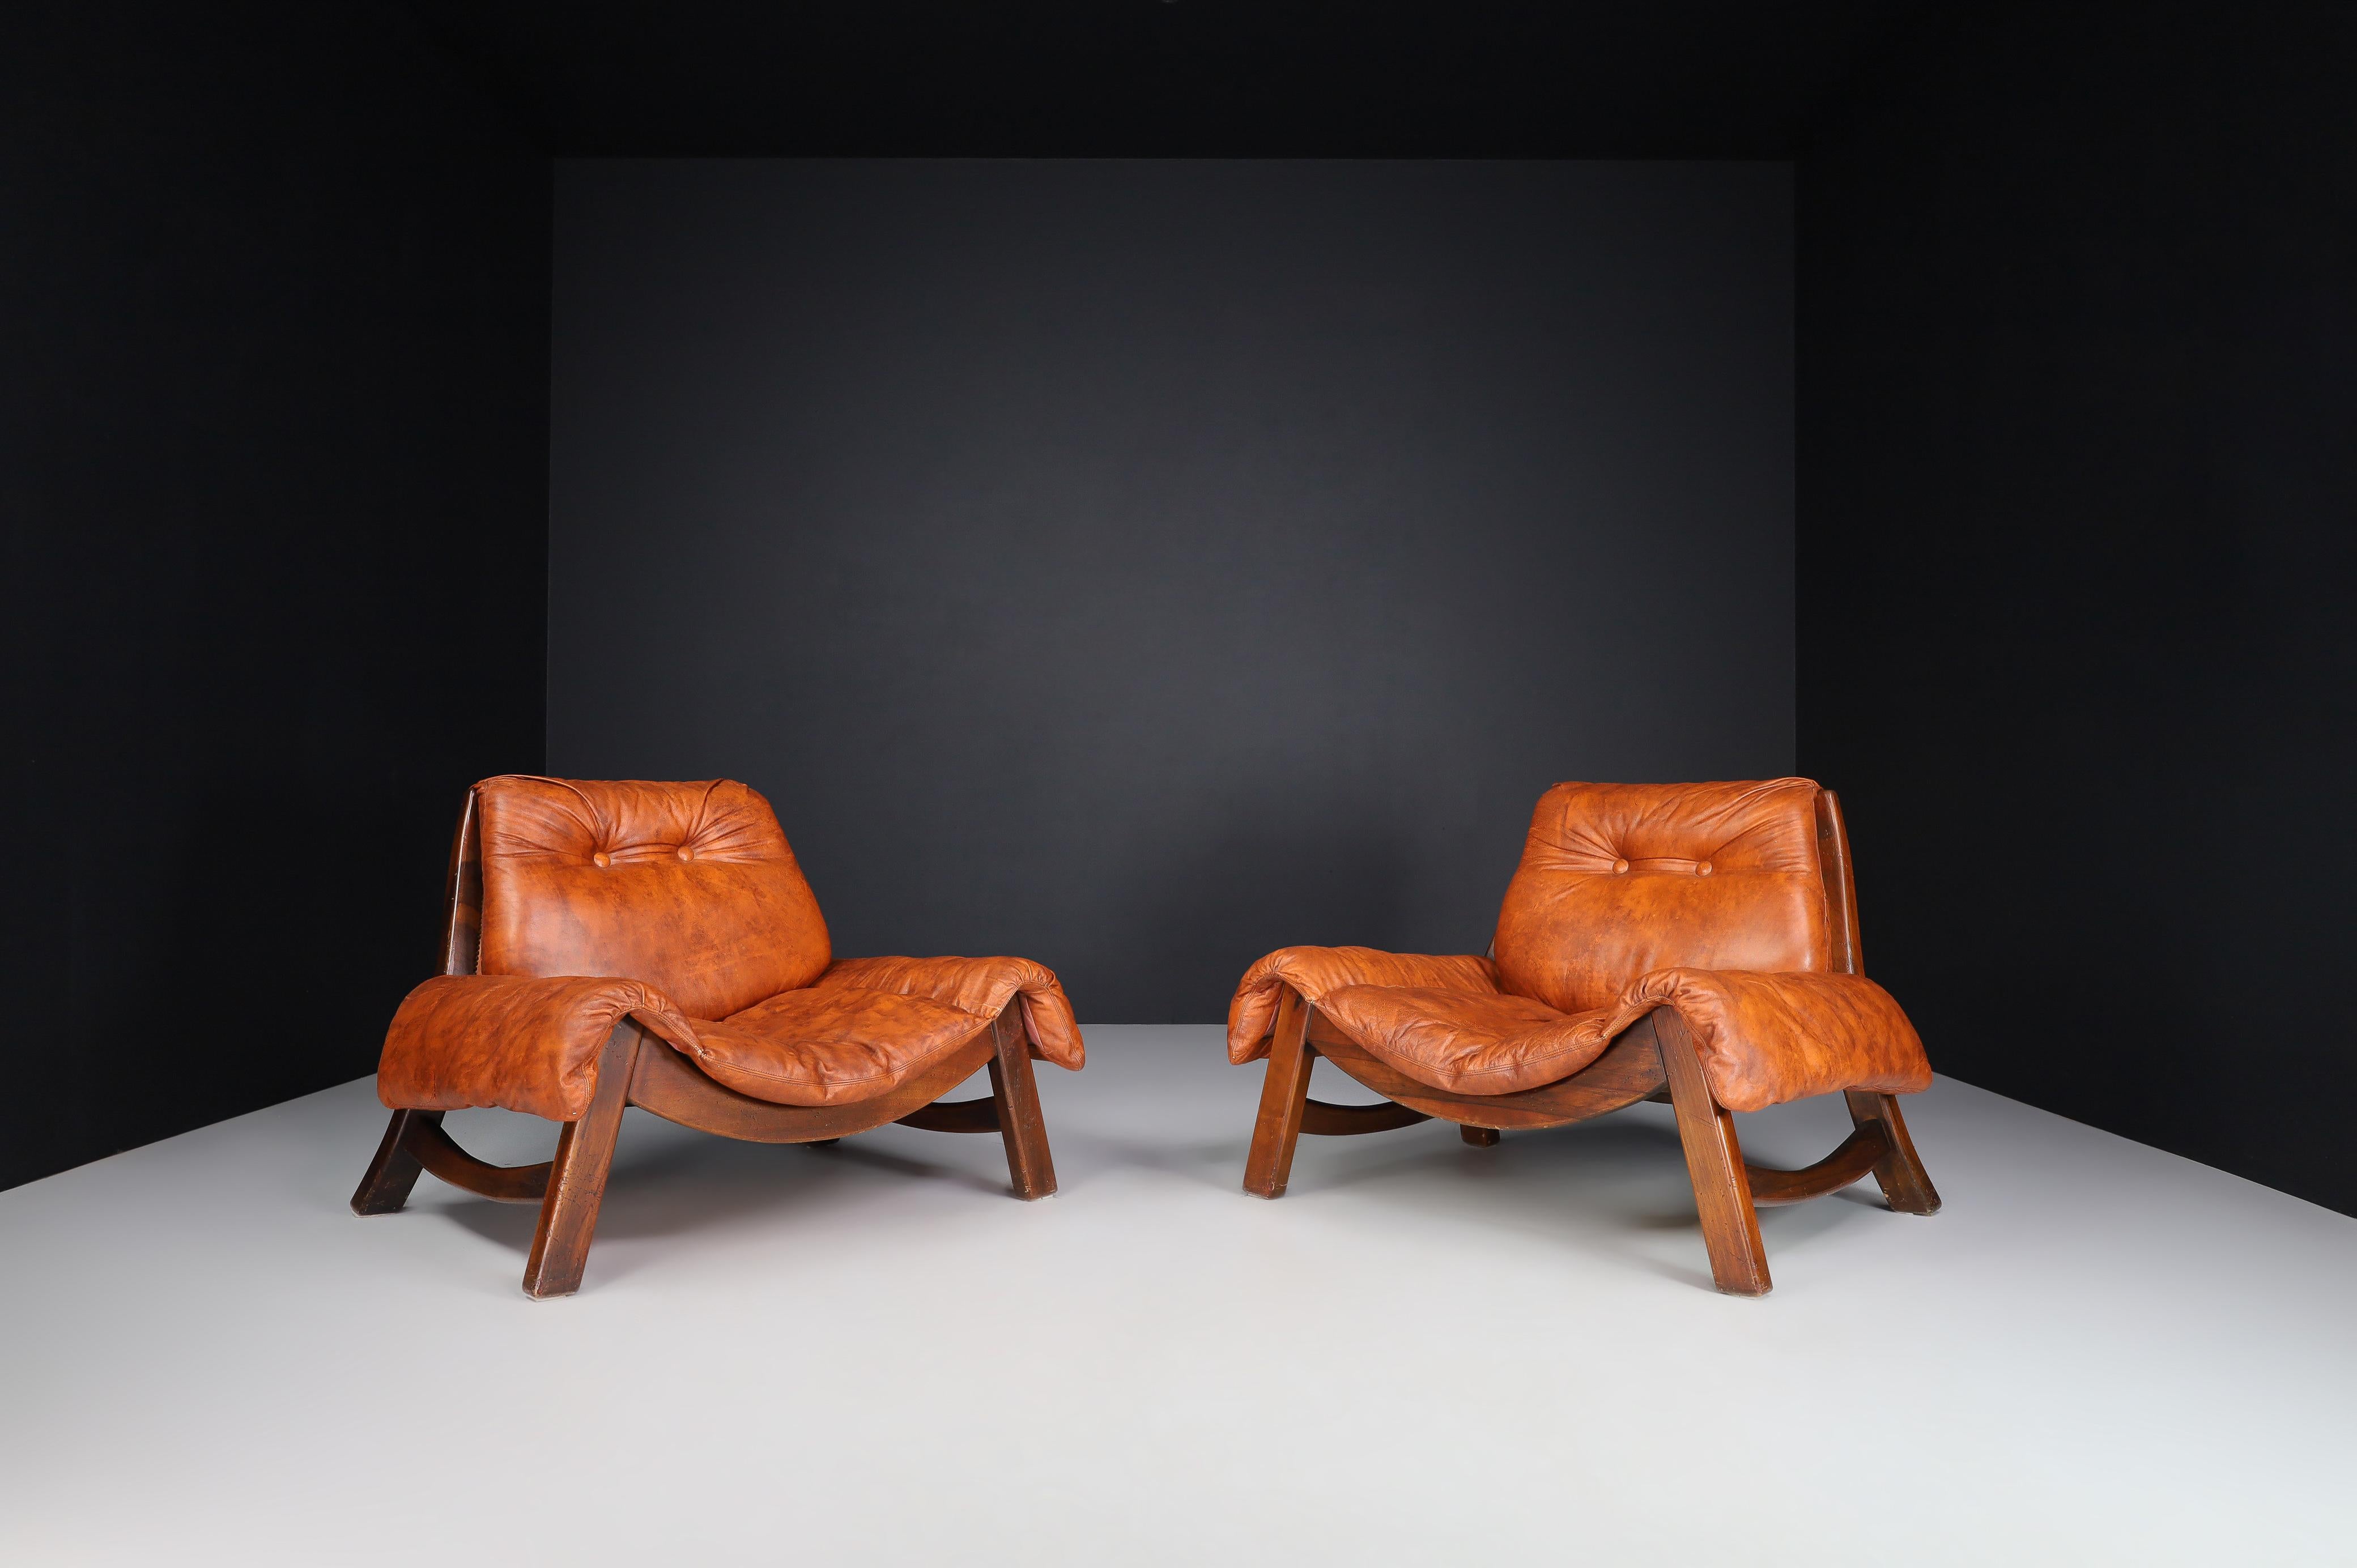 Italian pair of two large Lounge chairs in fine leather and Walnut Wood, Italy 1970s

These oversized Italian lounge chairs from the 1970s are made of solid walnut wood and fine leather. The chairs have an elegant design that combines both elements